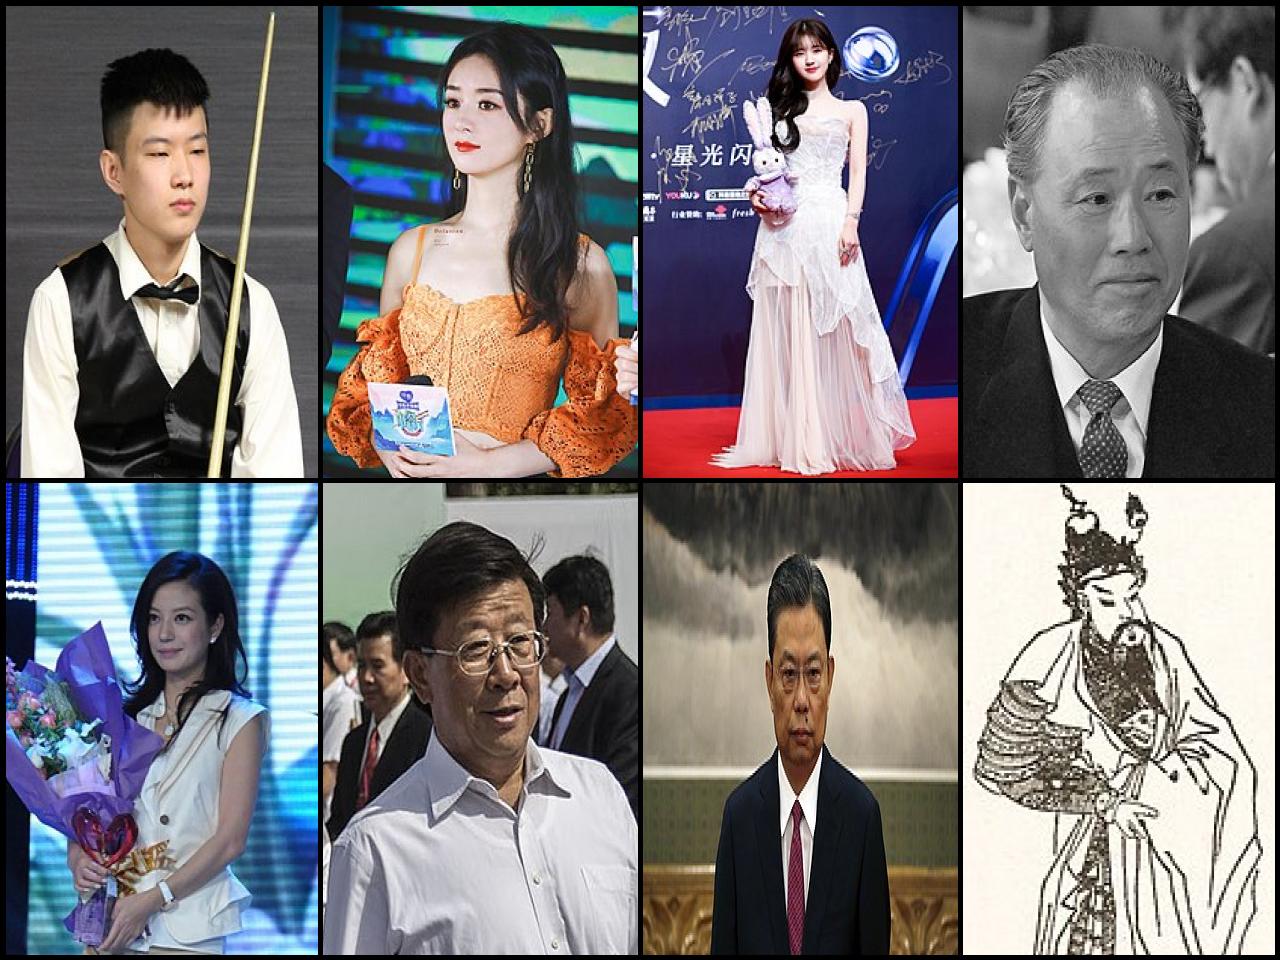 List of Famous people named <b>Zhao</b>